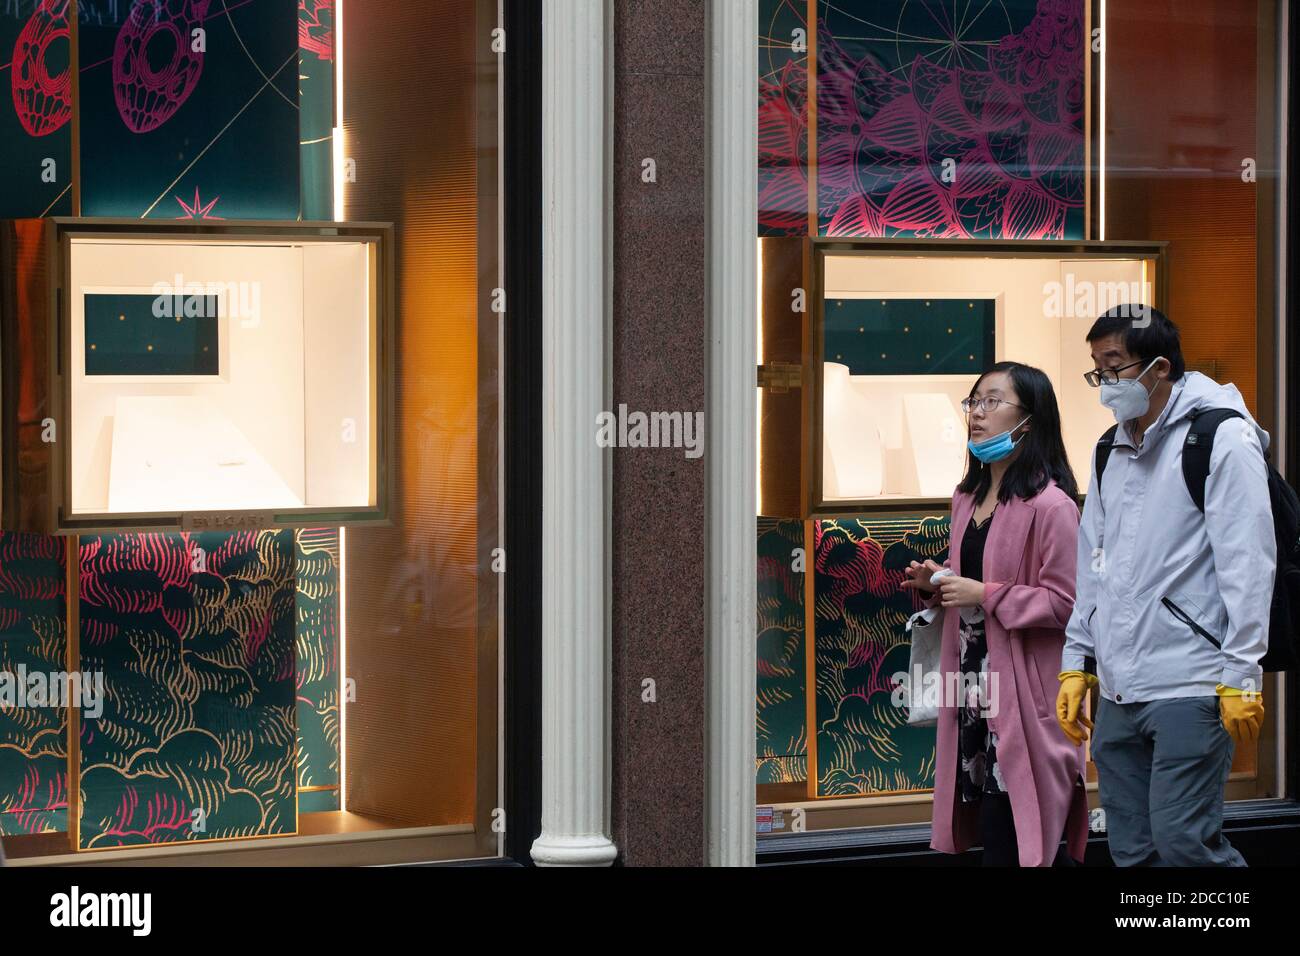 London, UK, 19 November 2020: During England's lockdown some people go window-shopping in London's West End but the jewellers Bulgari have removed all valuables from their window displays while they are closed. Anna Watson/Alamy Live News Stock Photo